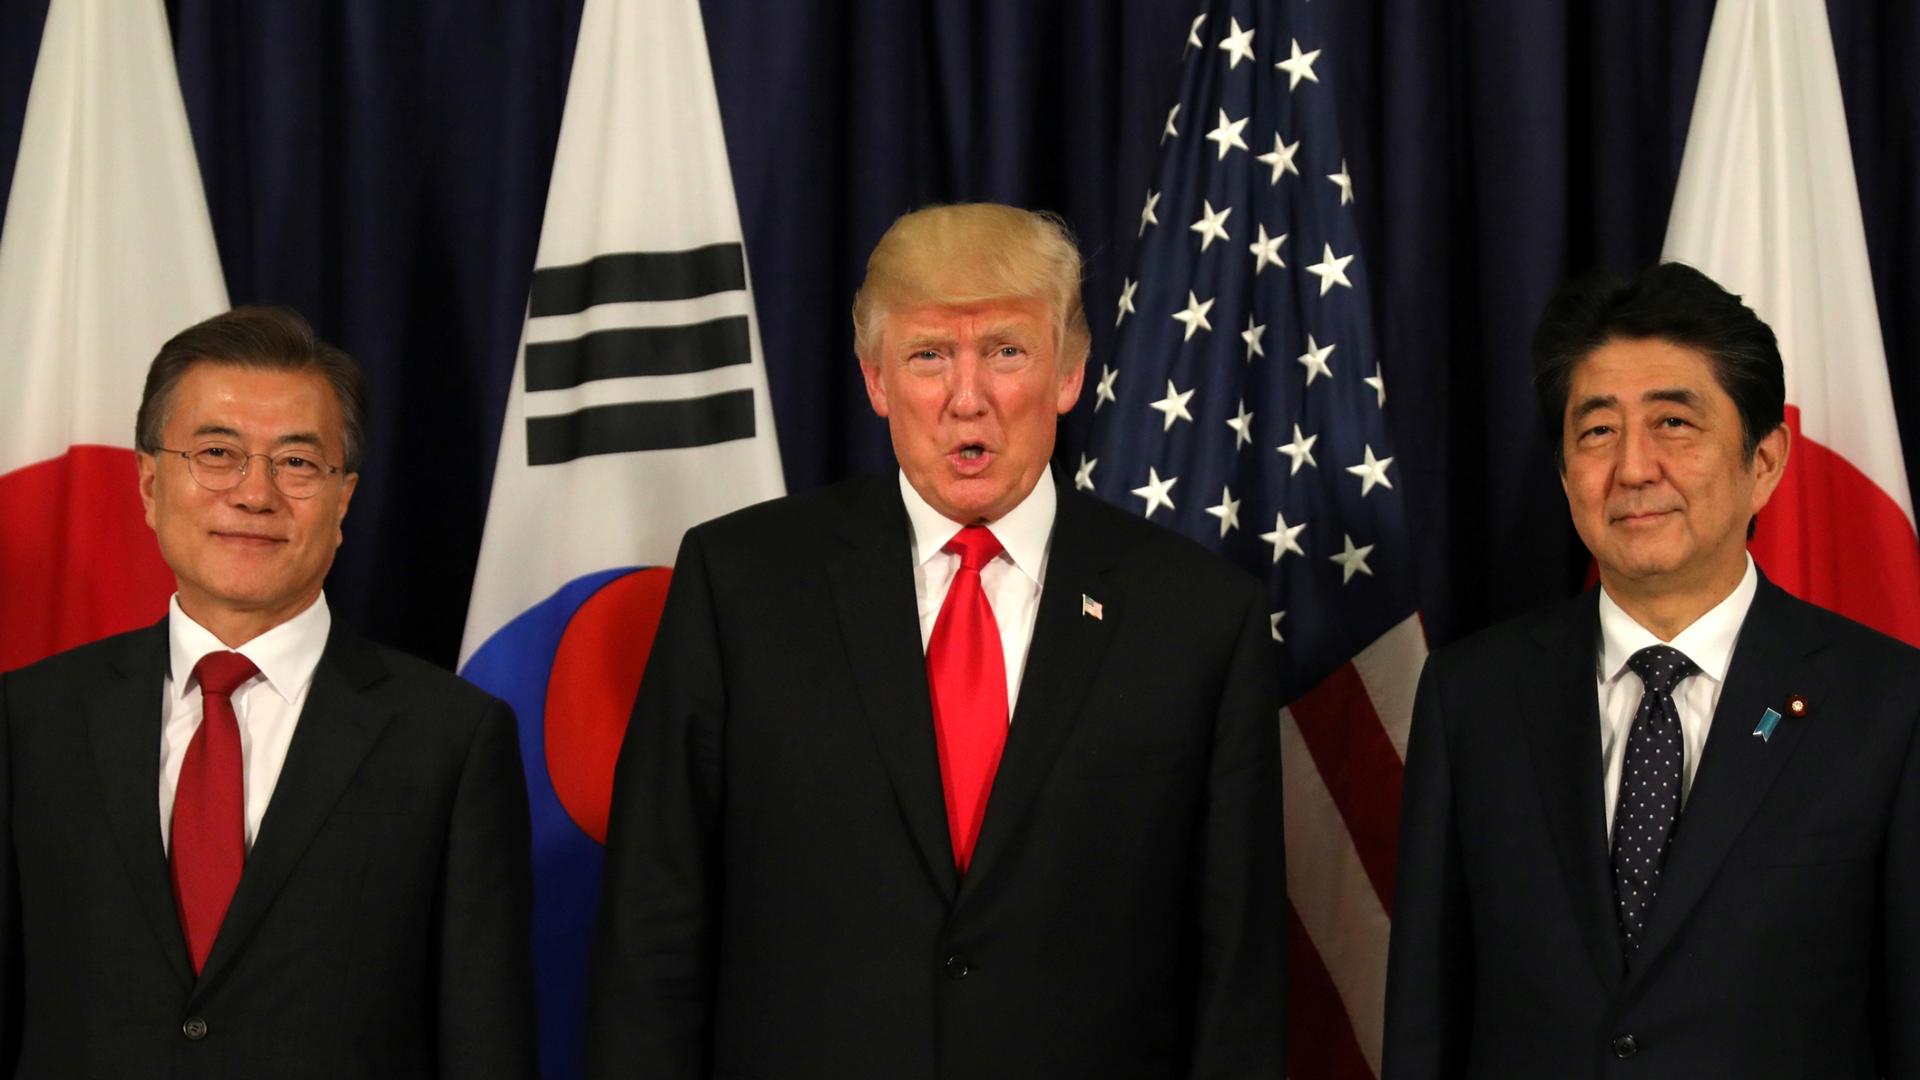 South Korean President Moon Jae-in, US President Donald Trump and Japanese Shinzō Abe stand in a line with flags form their countries behind them.